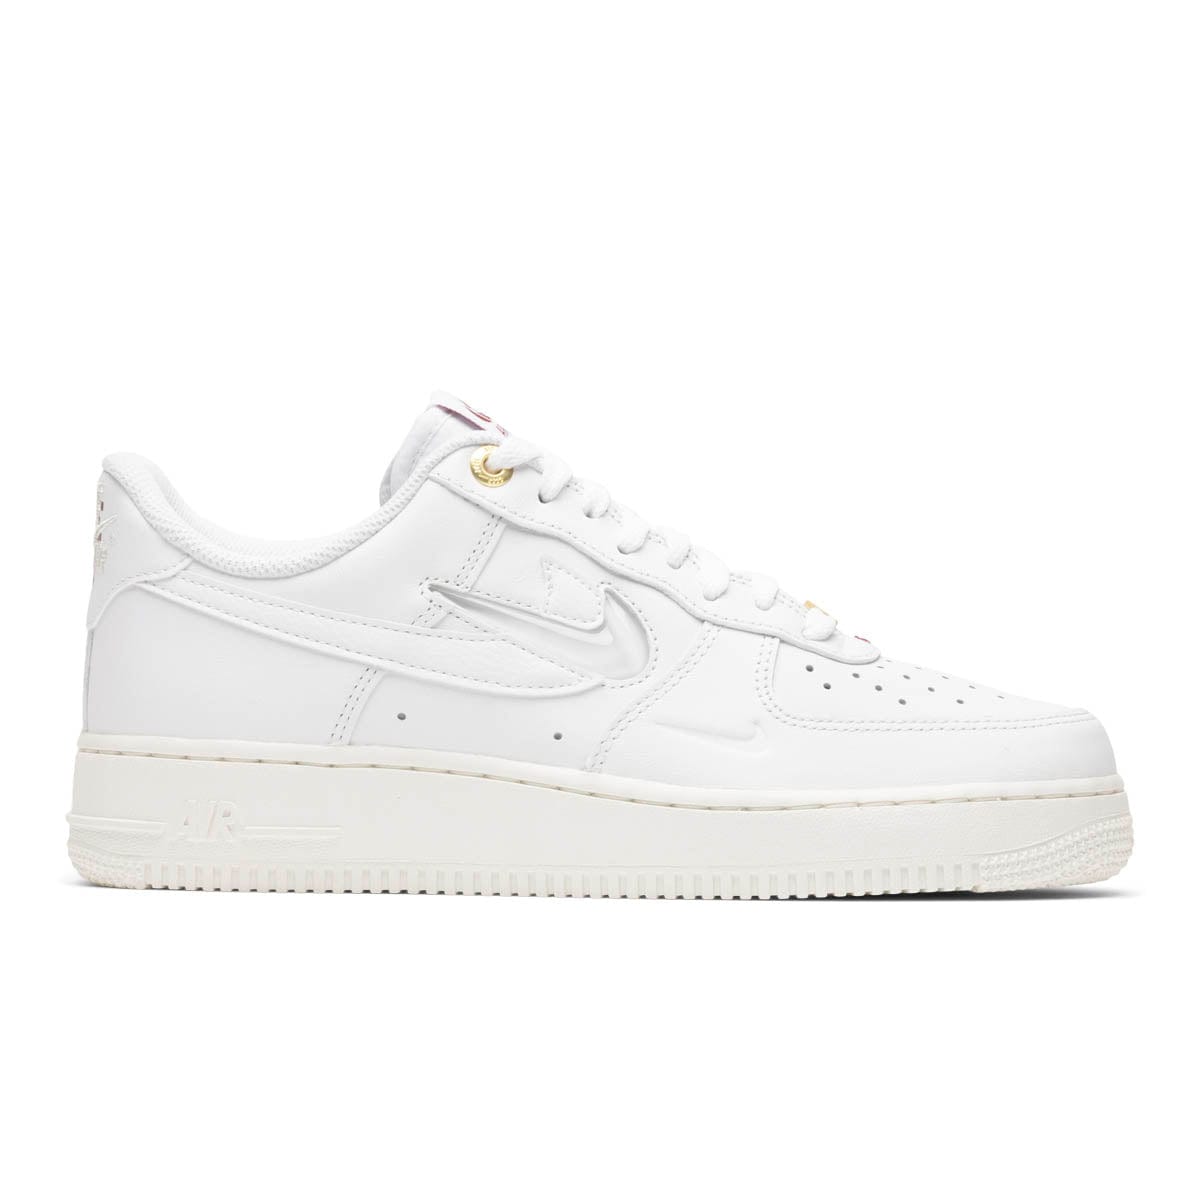 Nike Air Force 1 07 WB - Exclusivo modelo - Exclusive Shop